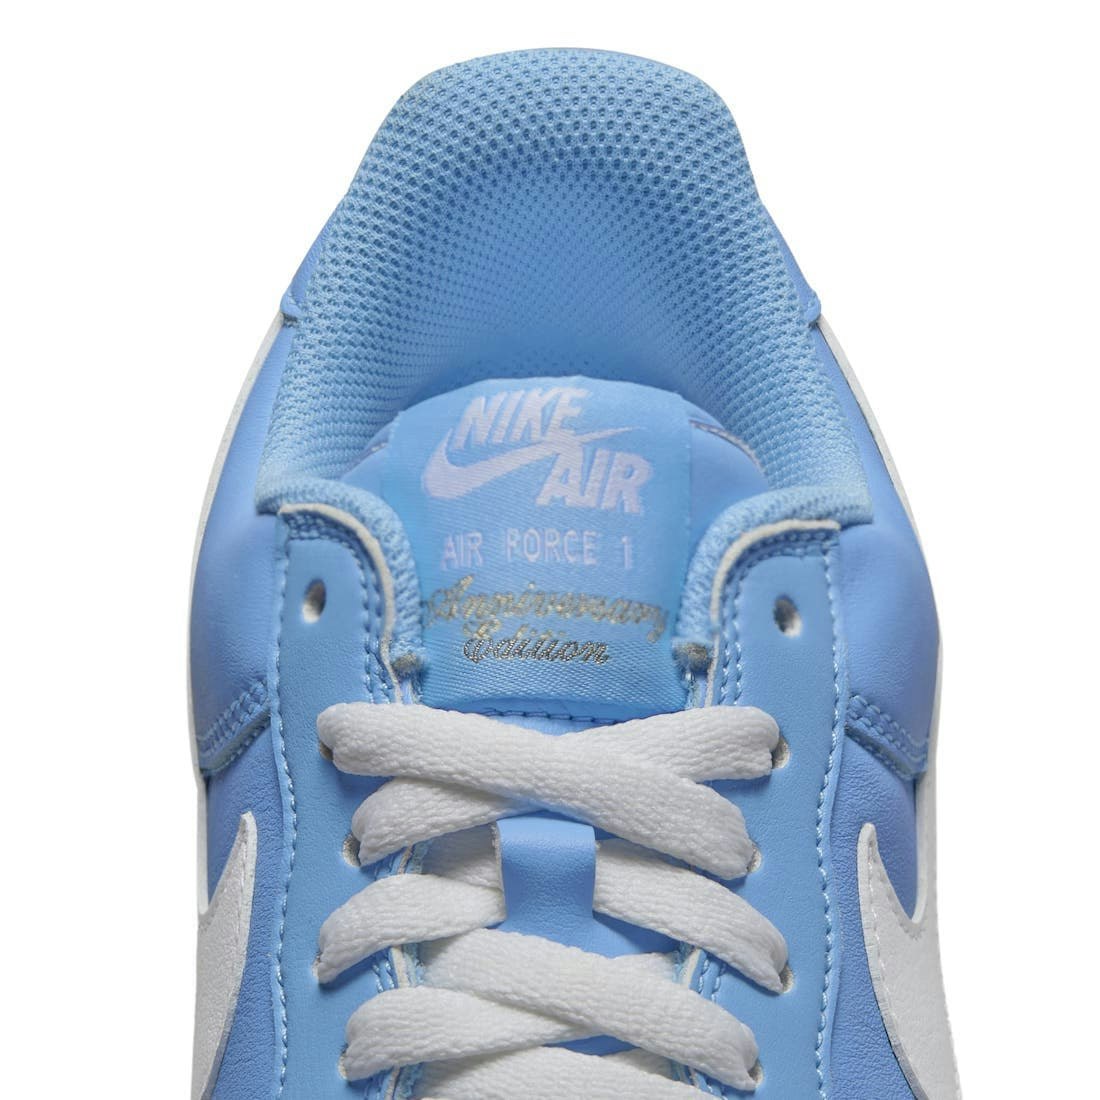 Nike Air Force 1 Low "Since 82" (University Blue)